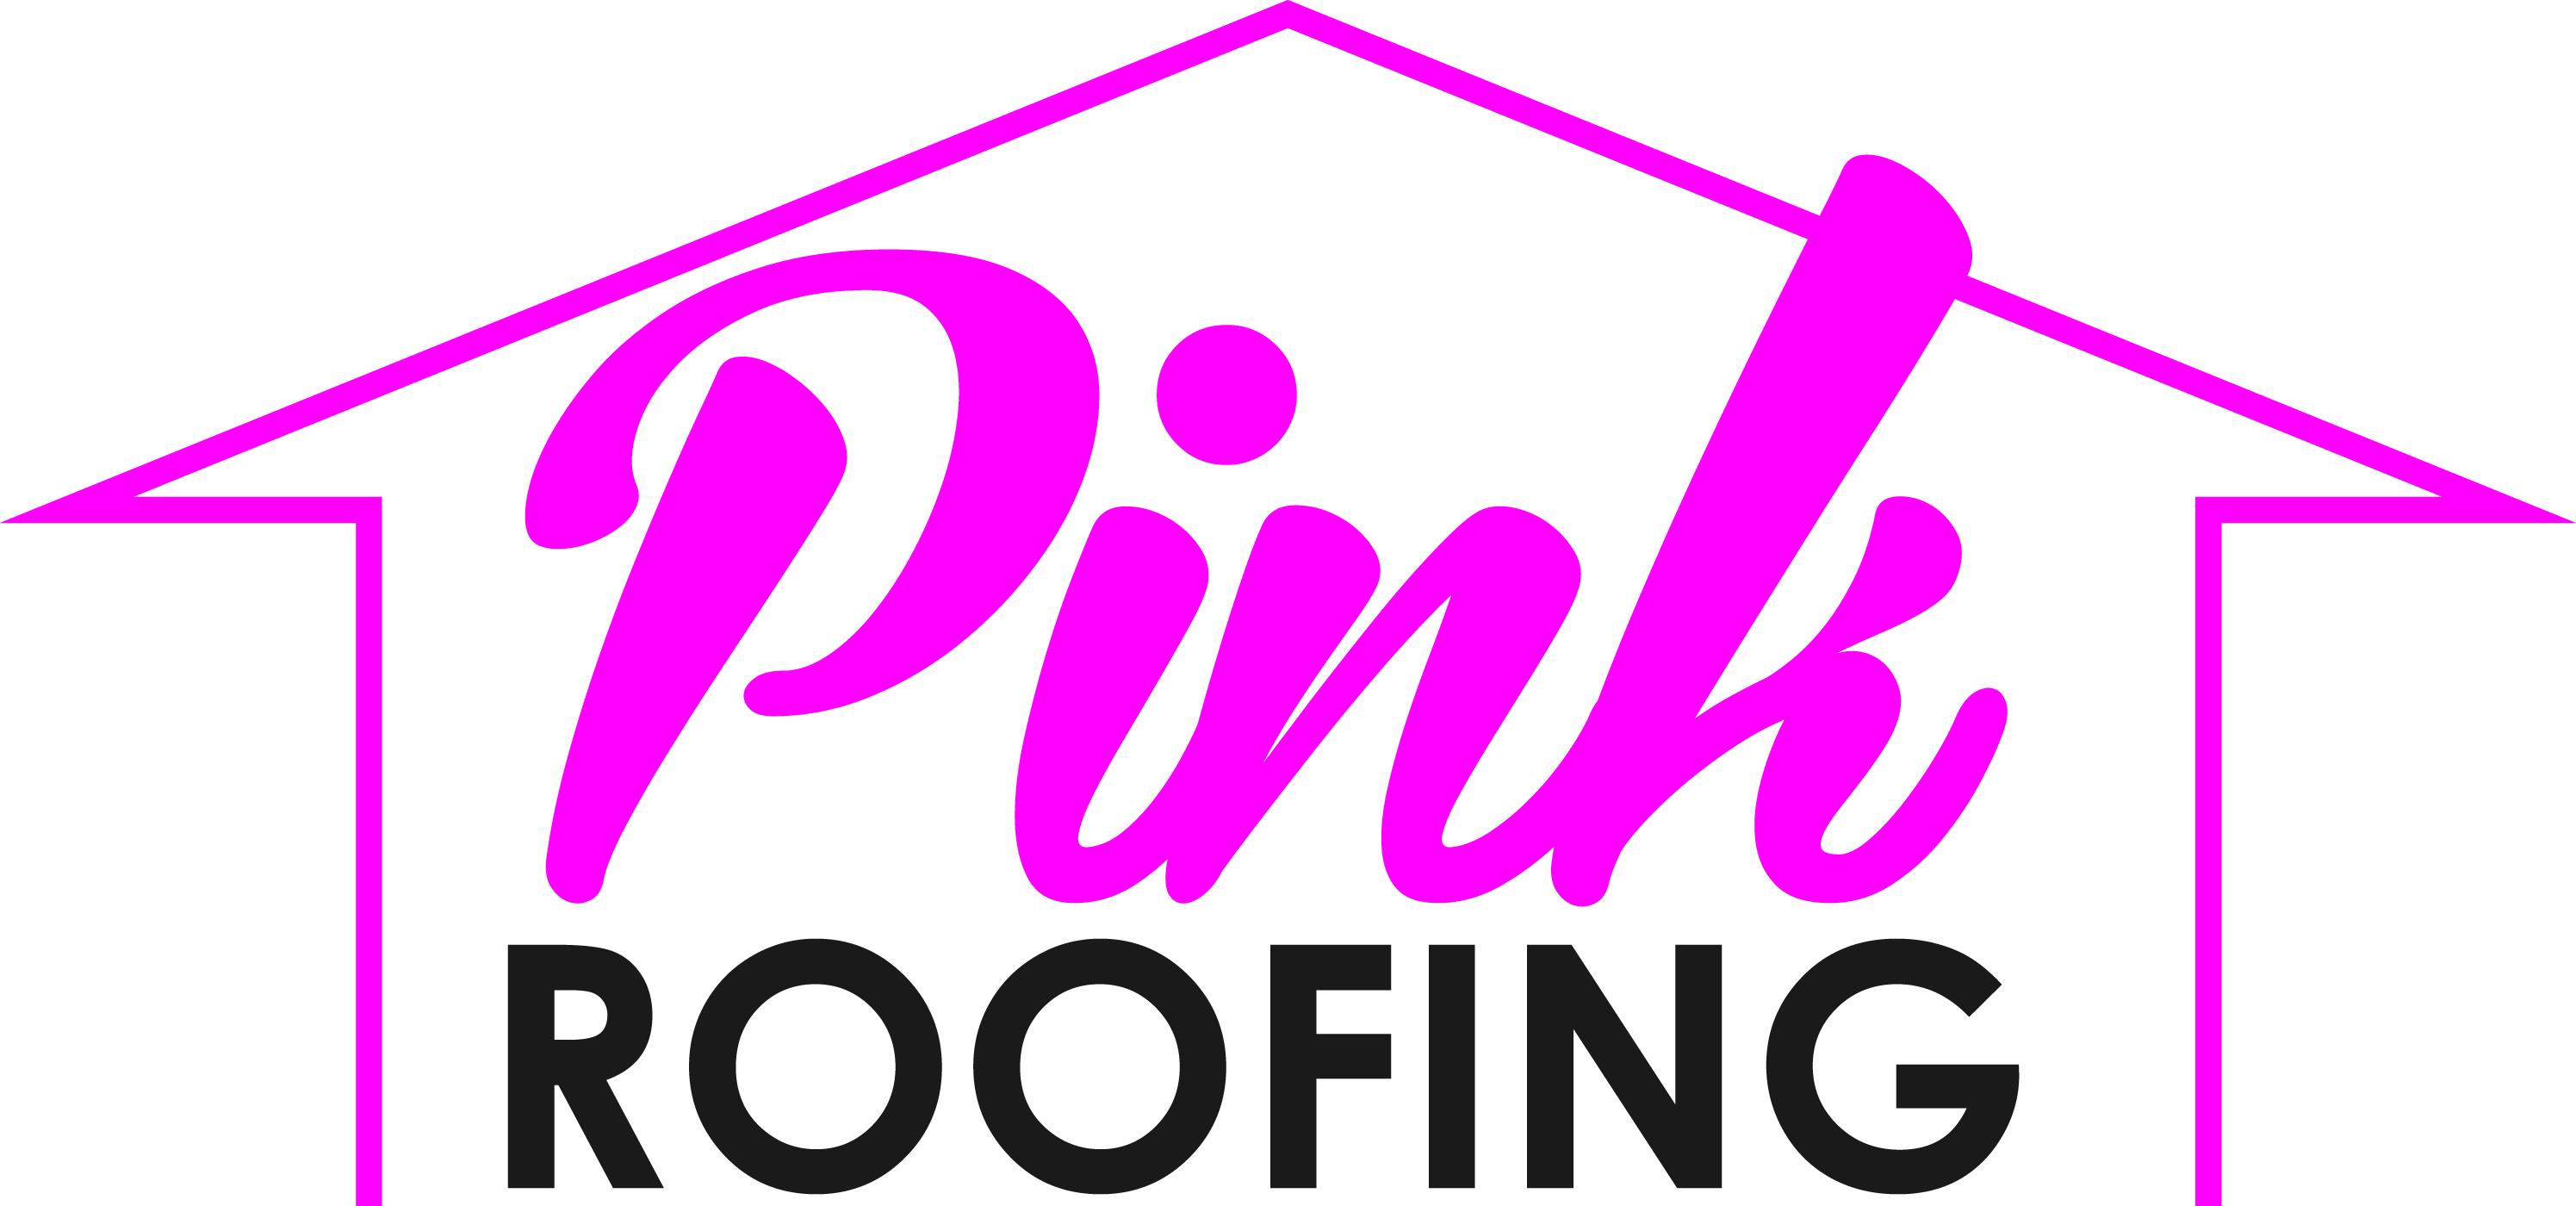 Pink Roofing